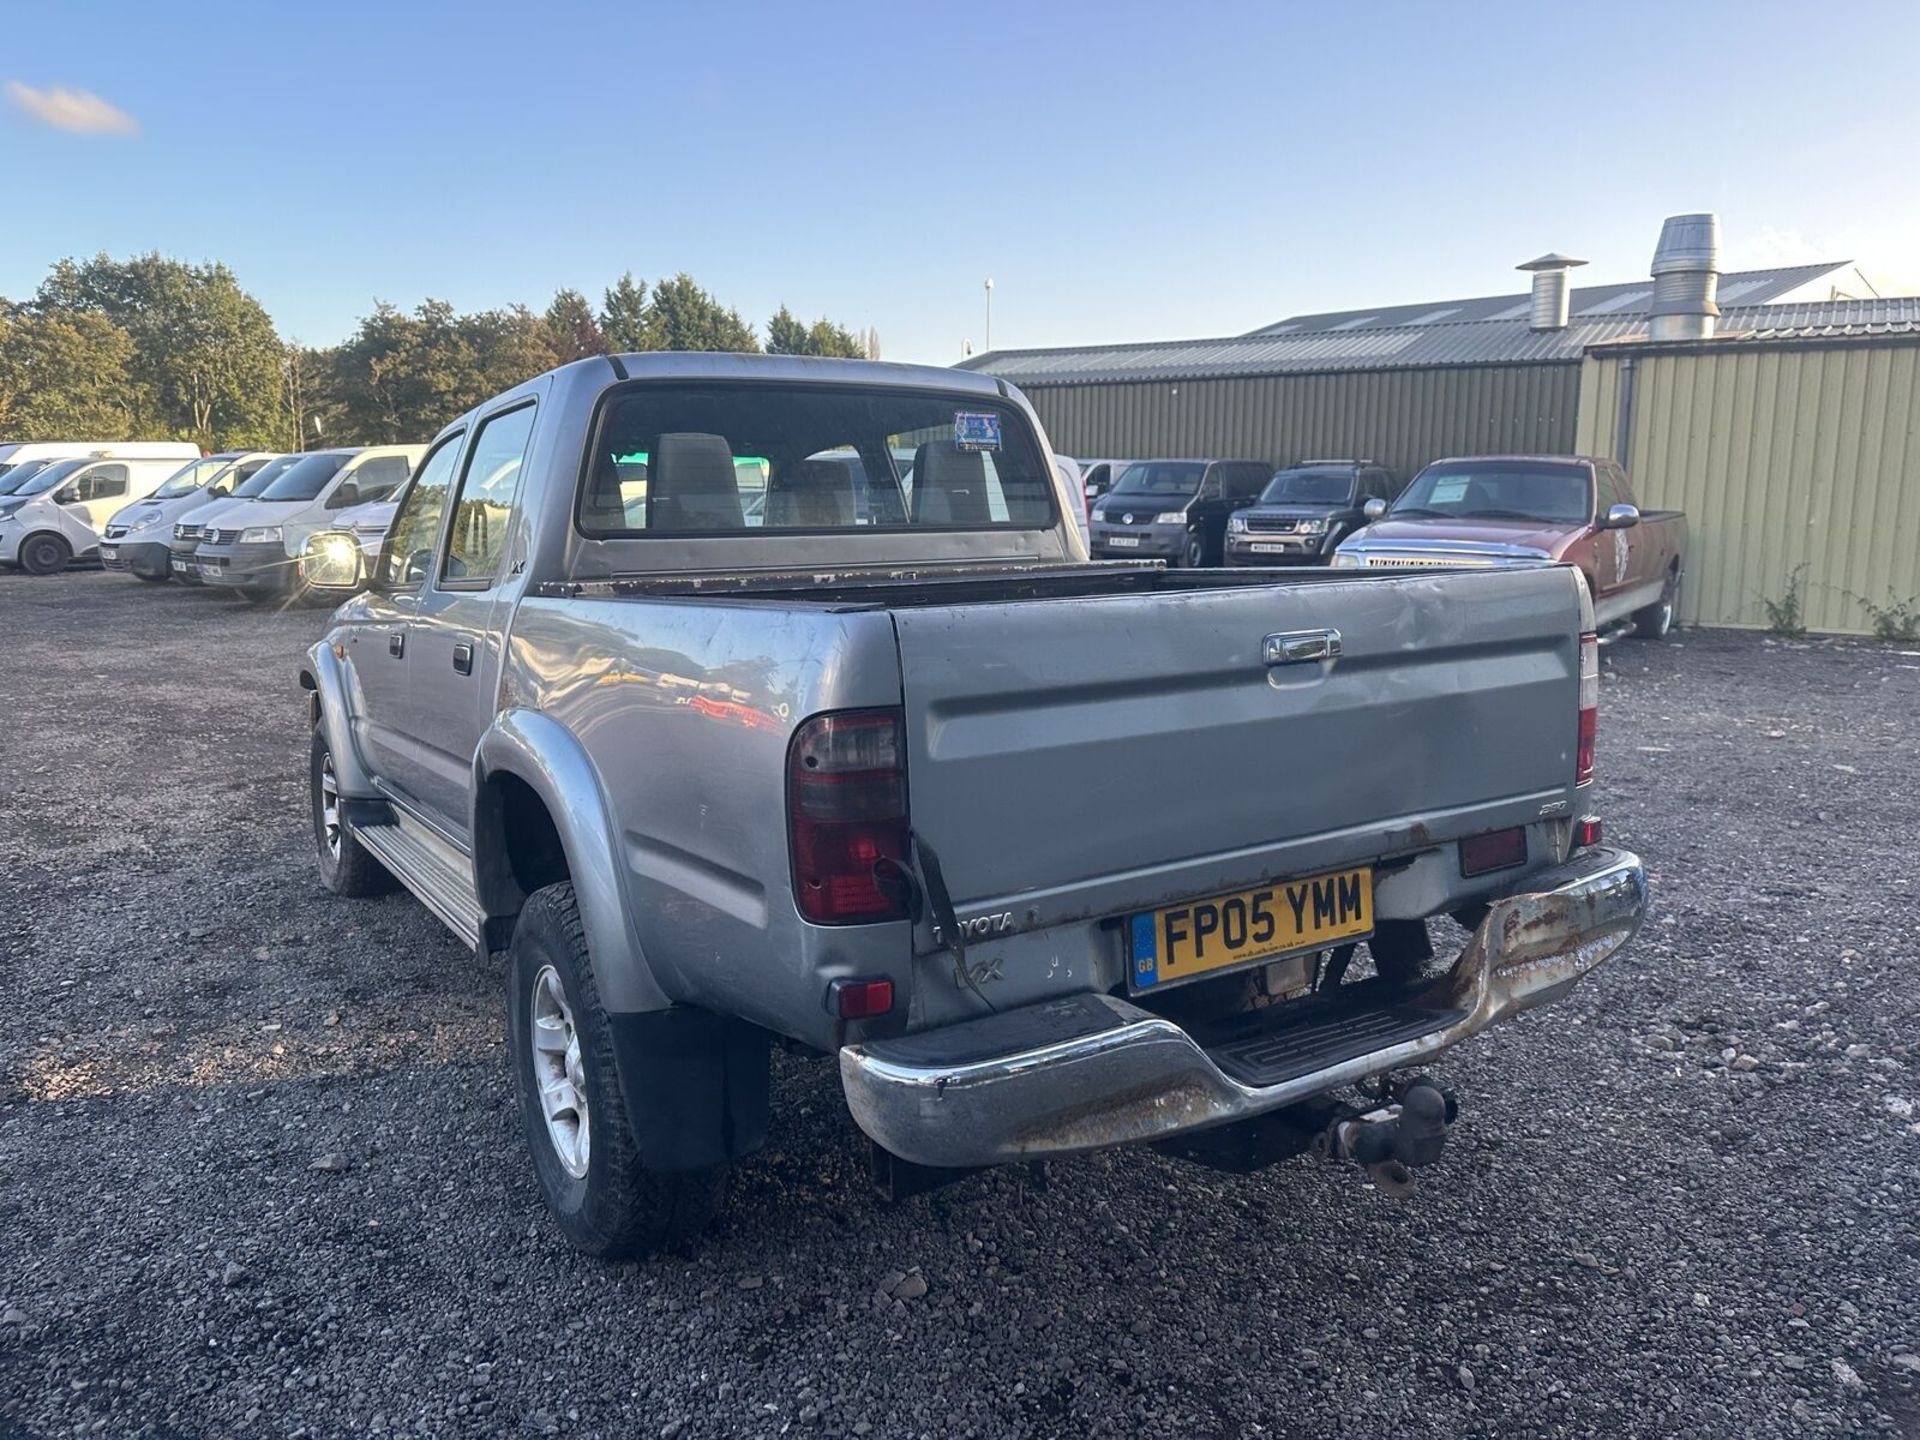 125K MILES - TOYOTA HILUX 4X4 WORKHORSE: WELL-MAINTAINED AND CAPABLE (NO VAT ON HAMMER) - Image 13 of 15